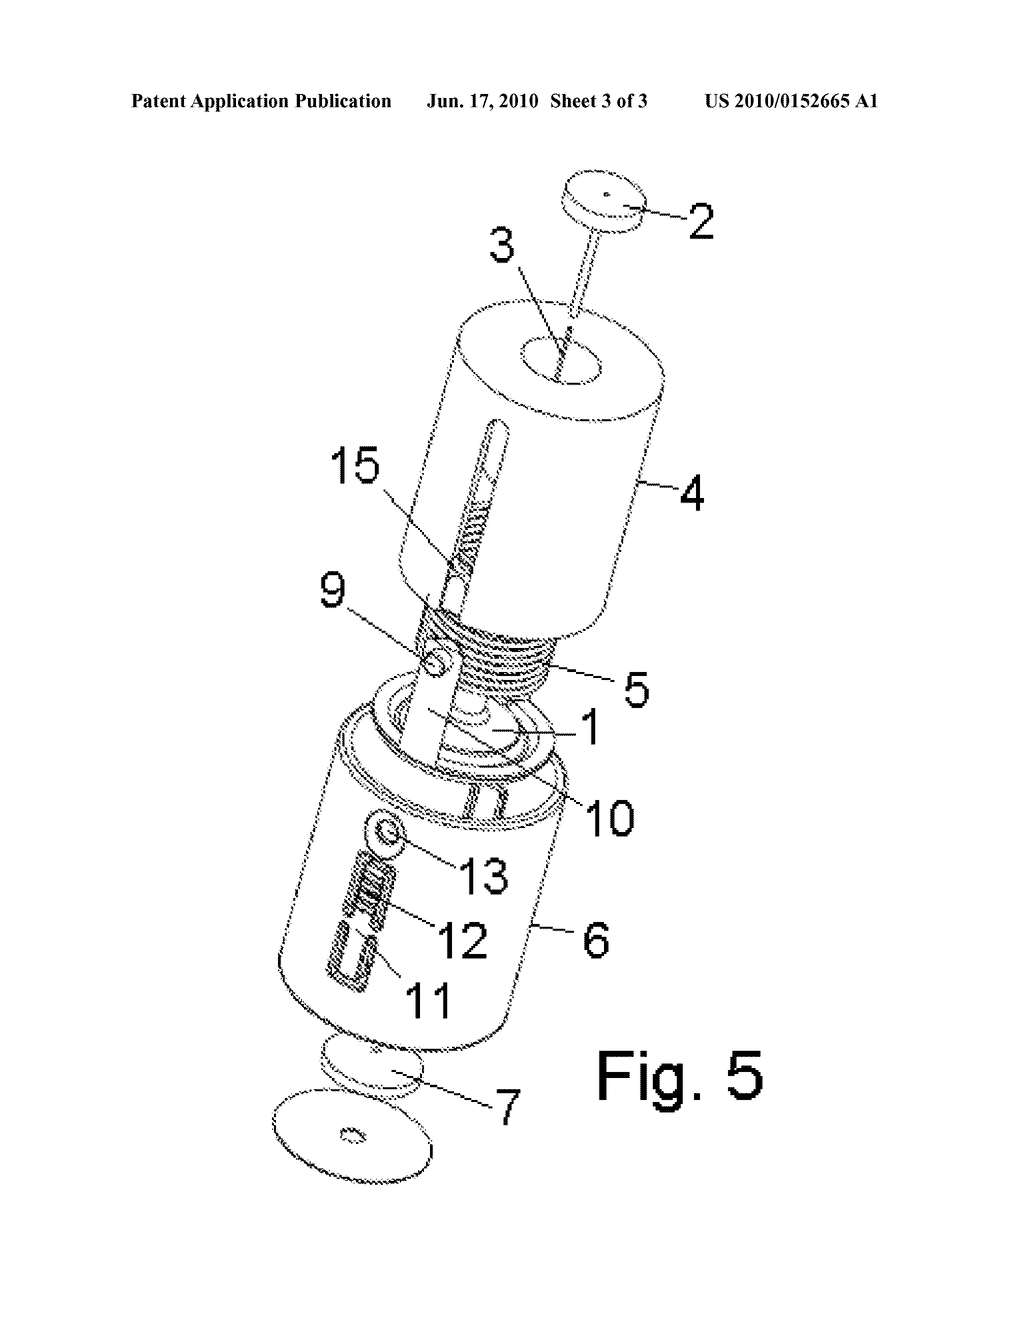 Cannula Insertion Device with Automatic Needle Retraction Comprising Only One Spring - diagram, schematic, and image 04